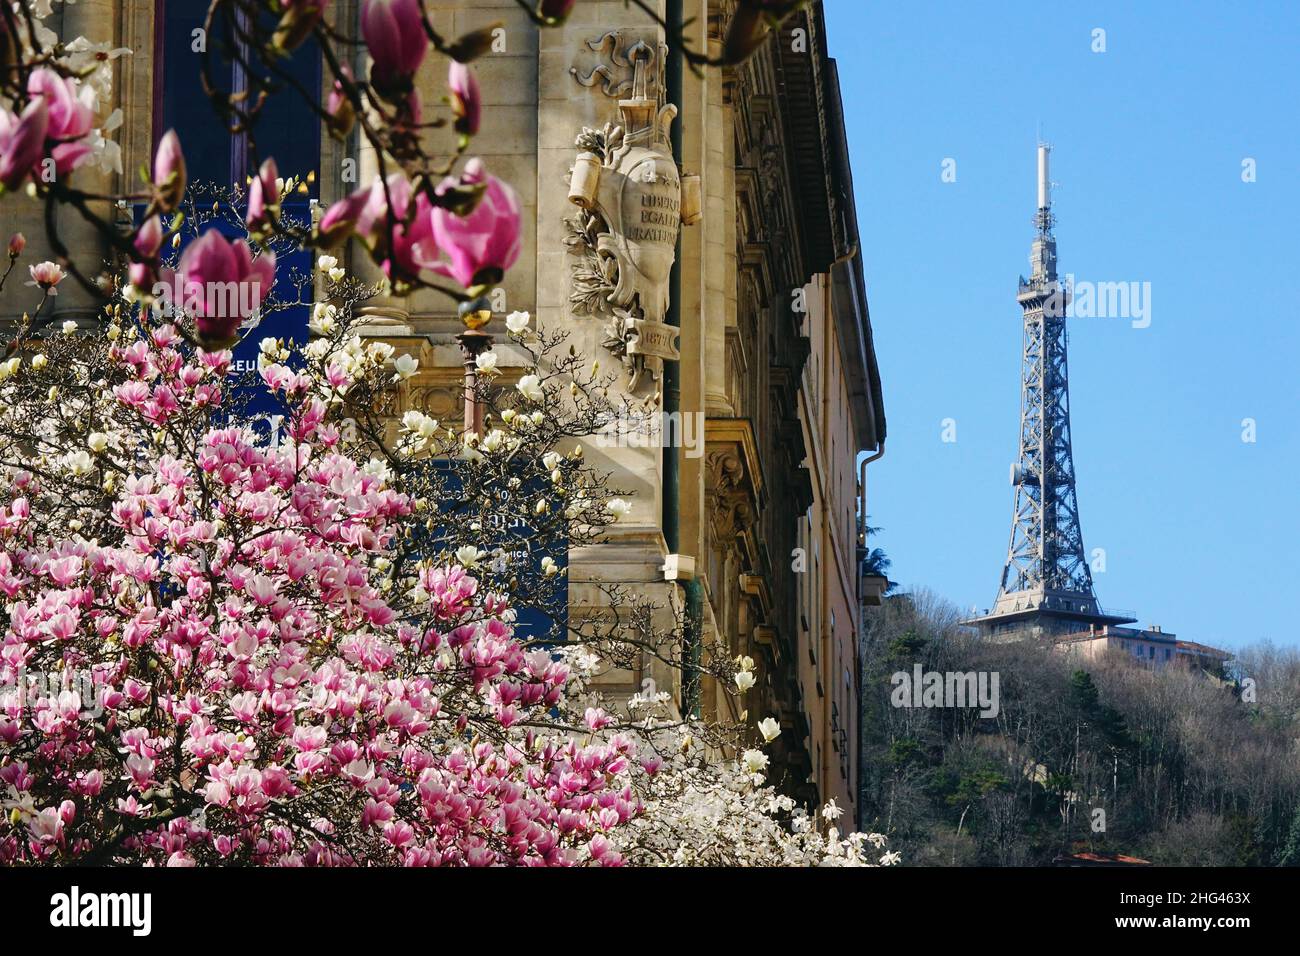 Tree of magnolias and antenna with Eiffel tower shape in Lyon, France Stock Photo